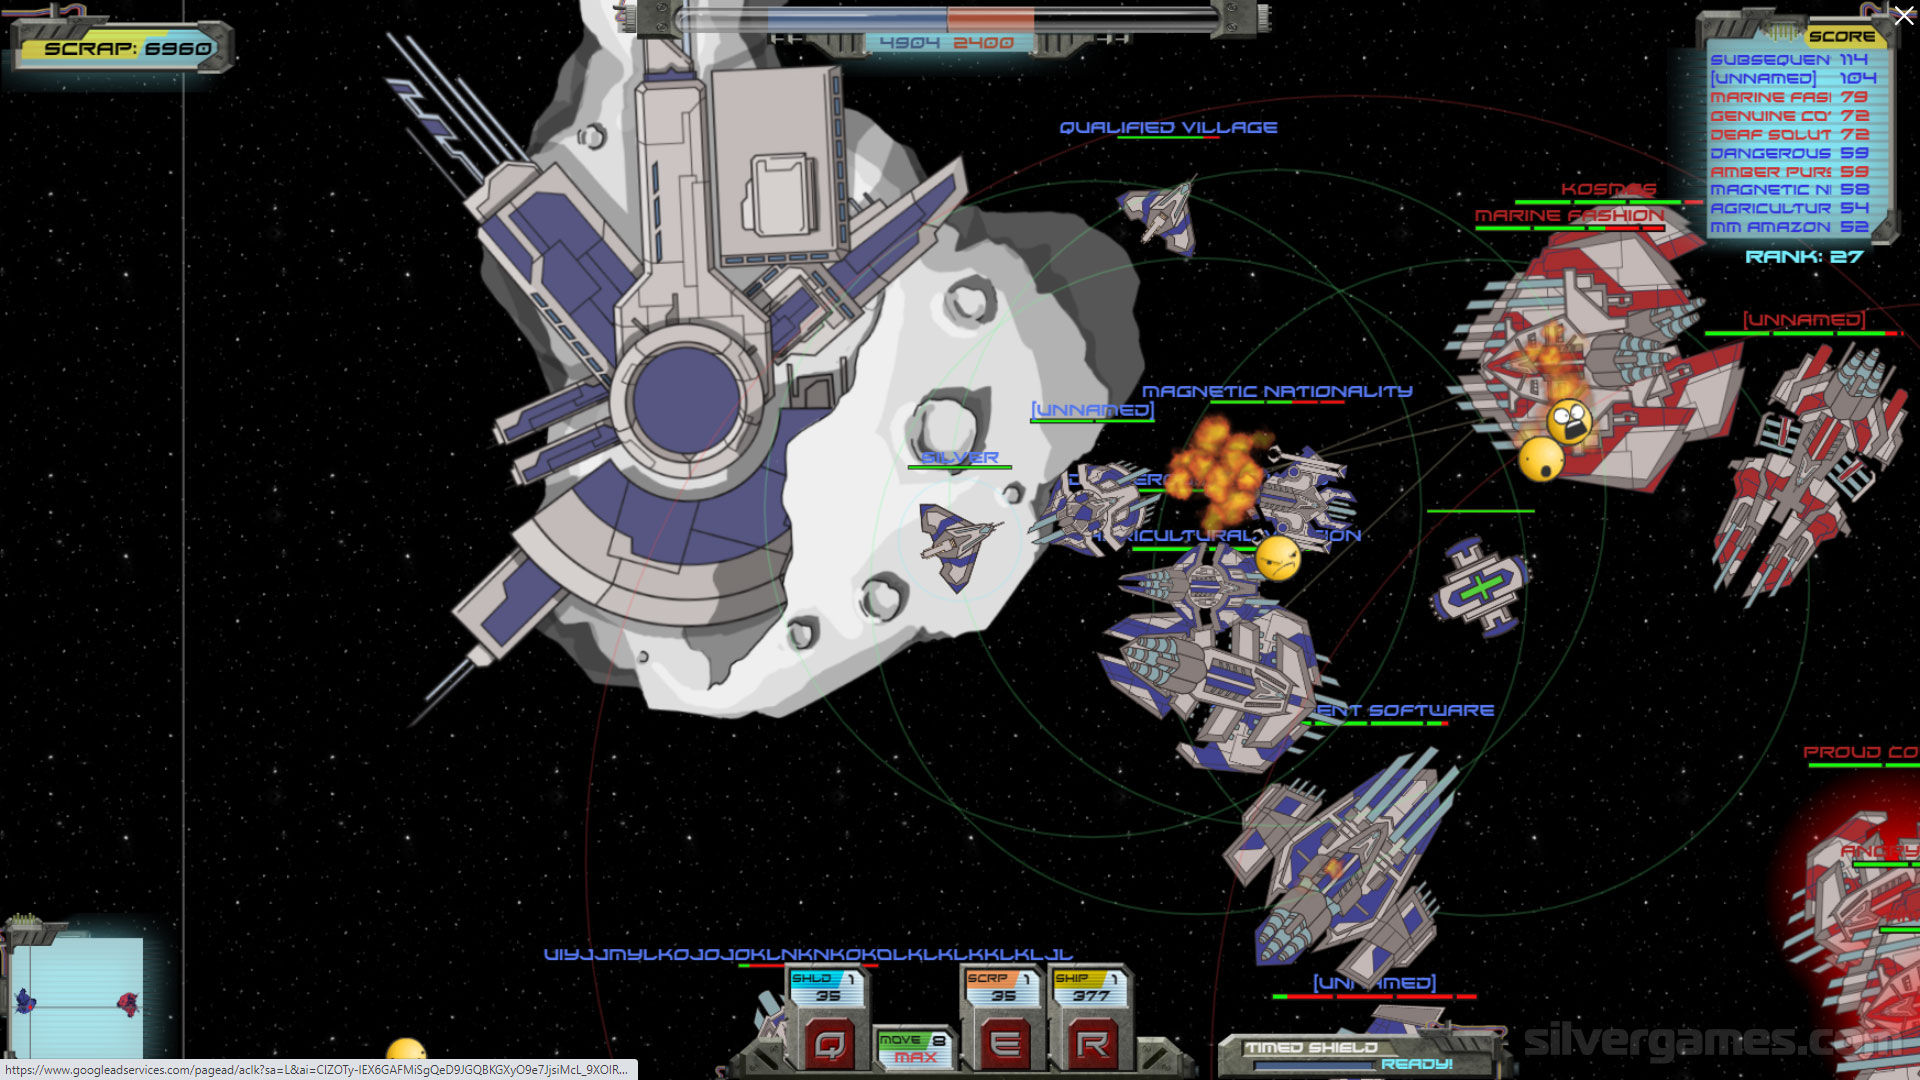 warin.space - Play war in space Free Online Game